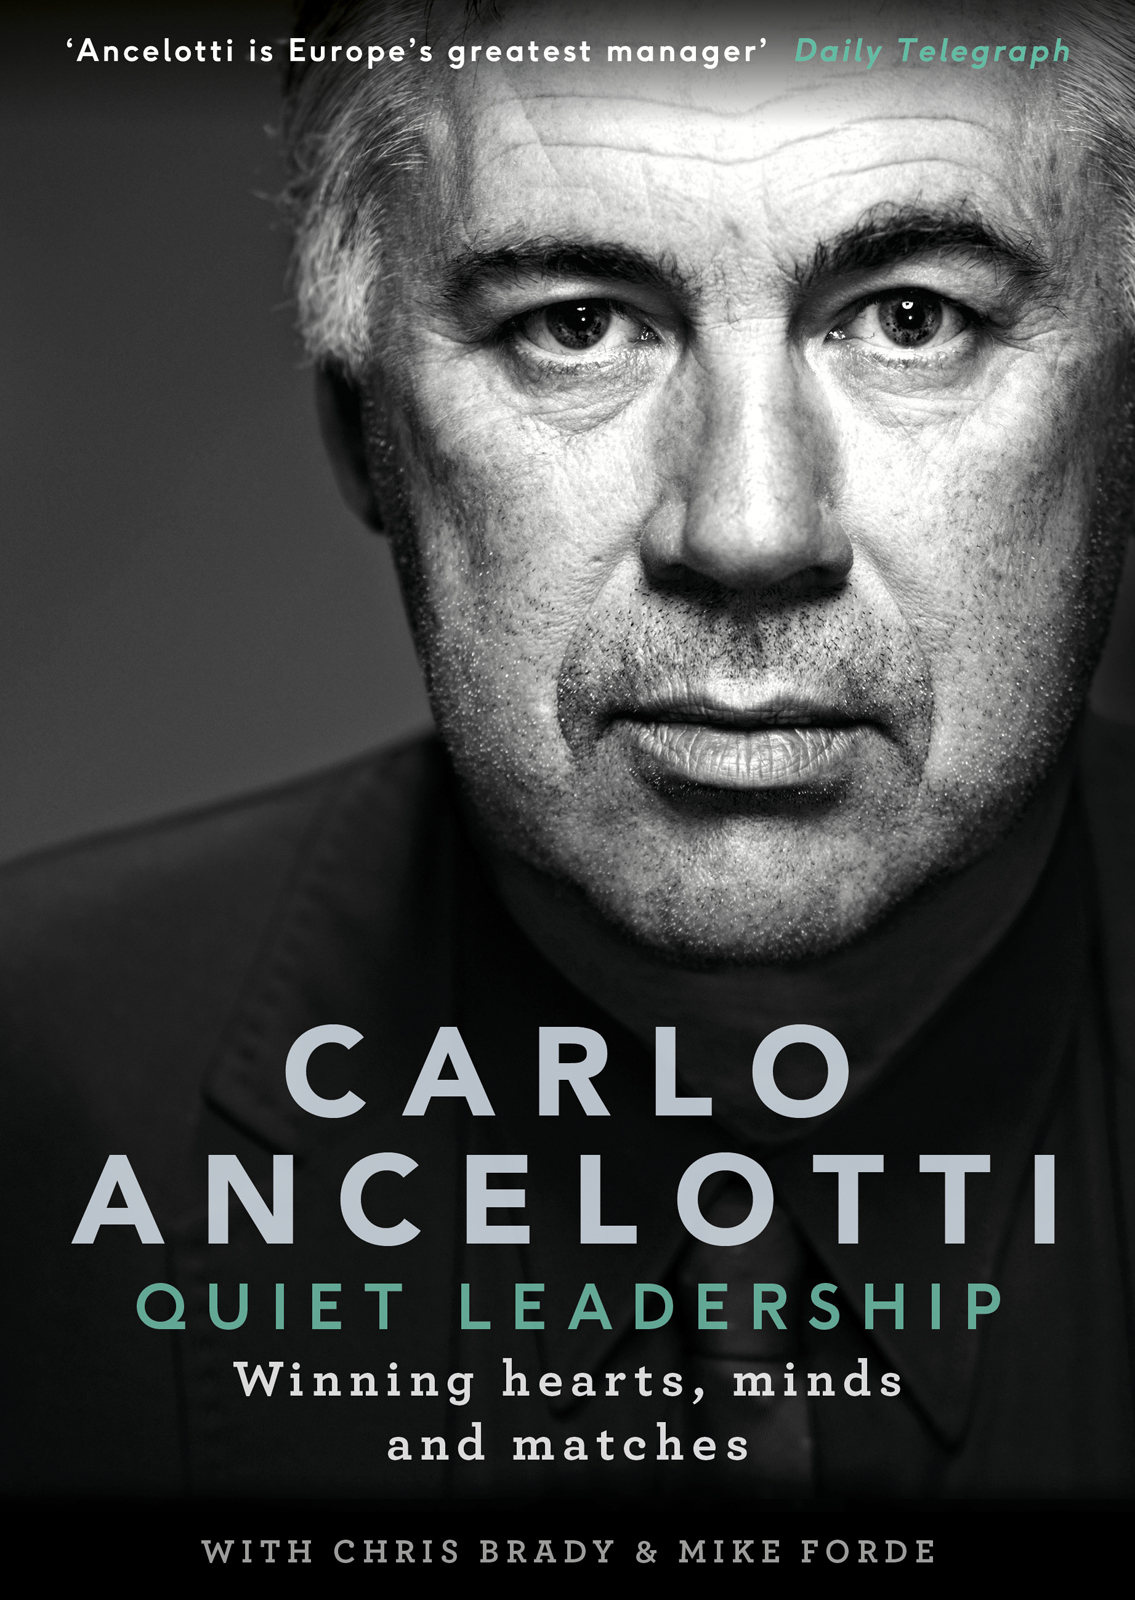 Contents Carlo Ancelotti QUIET LEADERSHIP Winning hearts minds and matches - photo 1